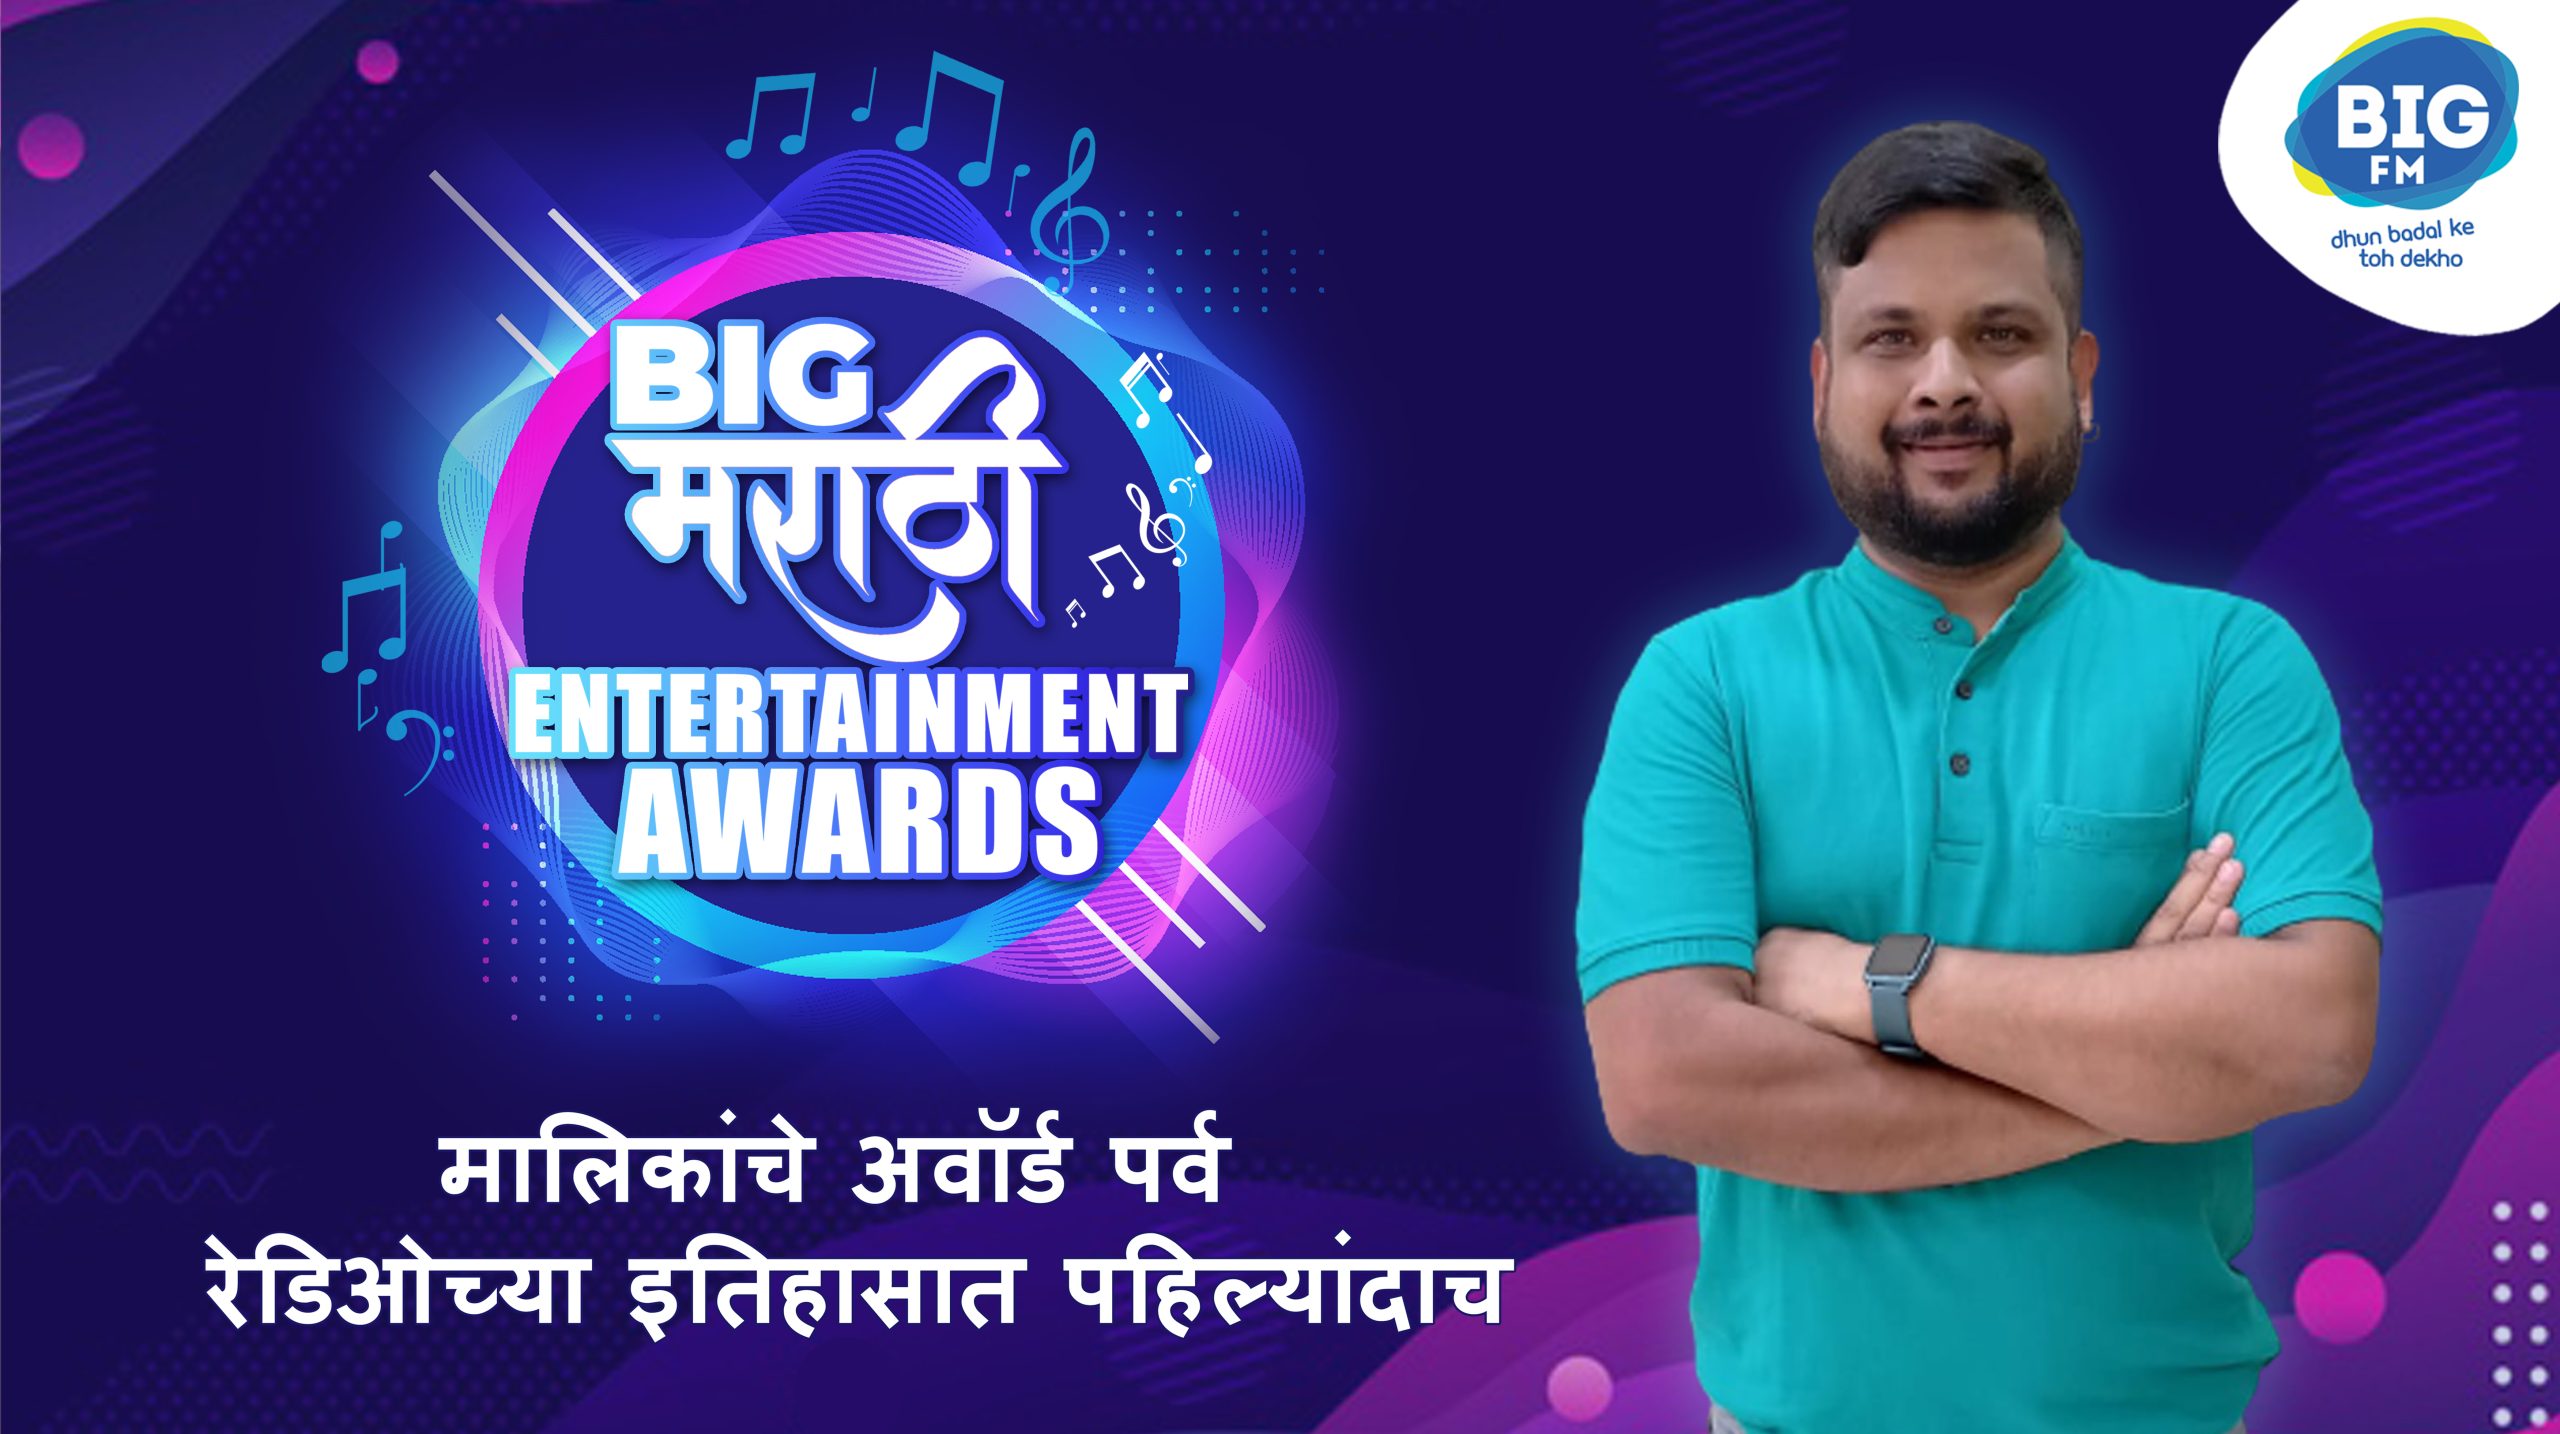 Big FM’s ‘Big Marathi Entertainment Awards’ witnessed the best of diverse talents come together to receive all the love and acknowledgment!